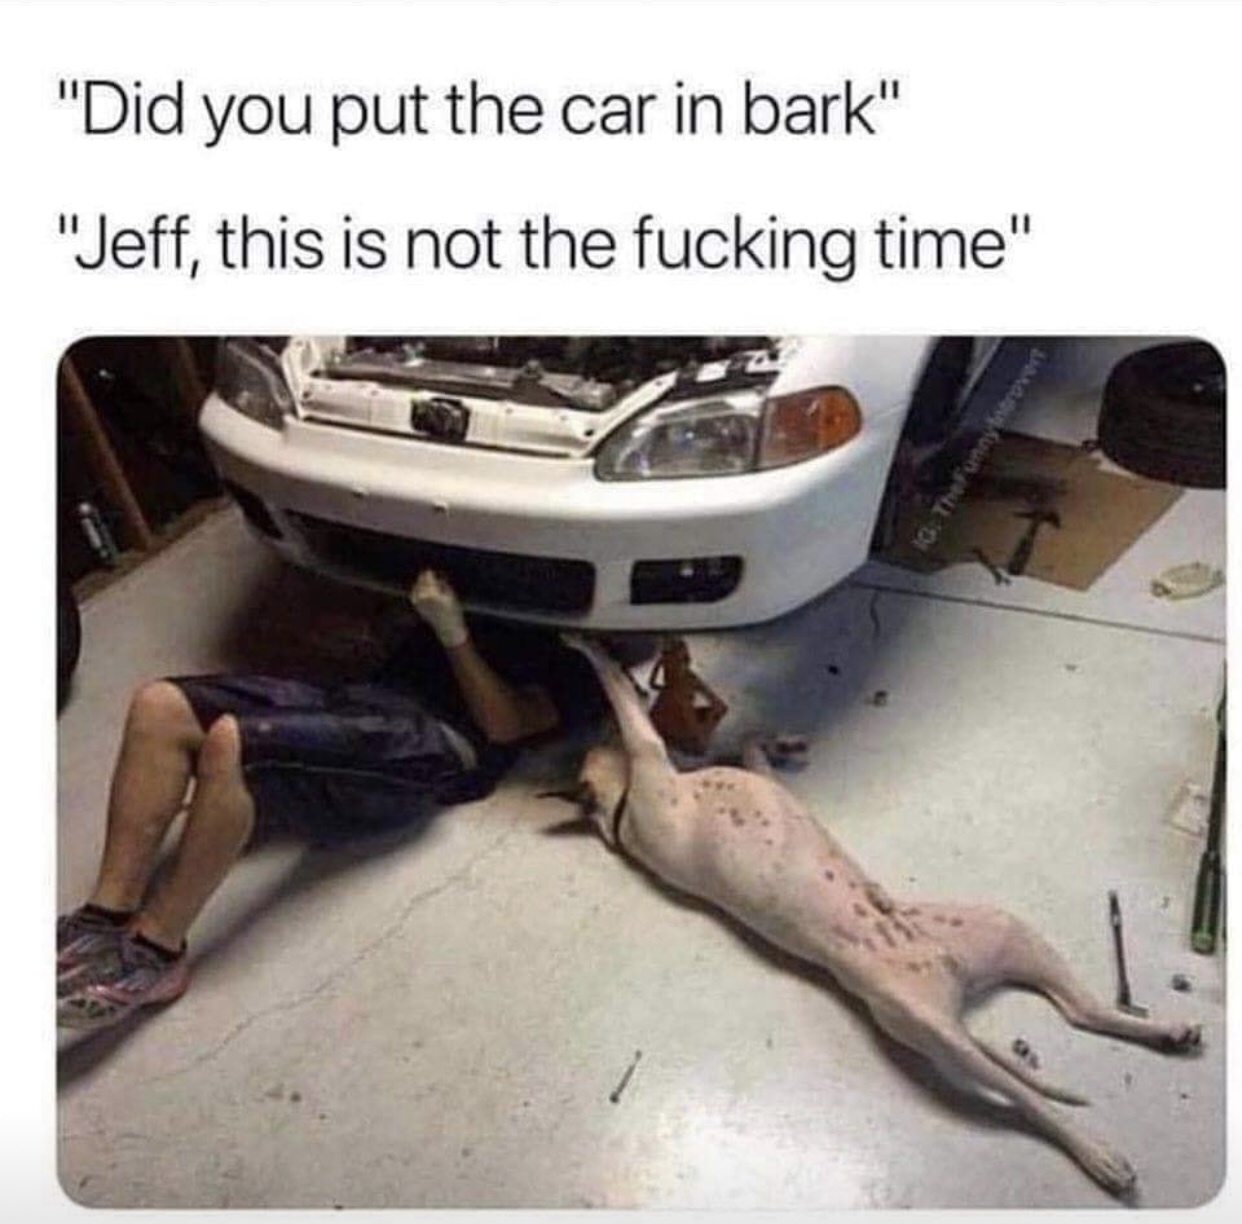 did you put the car in bark - "Did you put the car in bark" "Jeff, this is not the fucking time" The funny